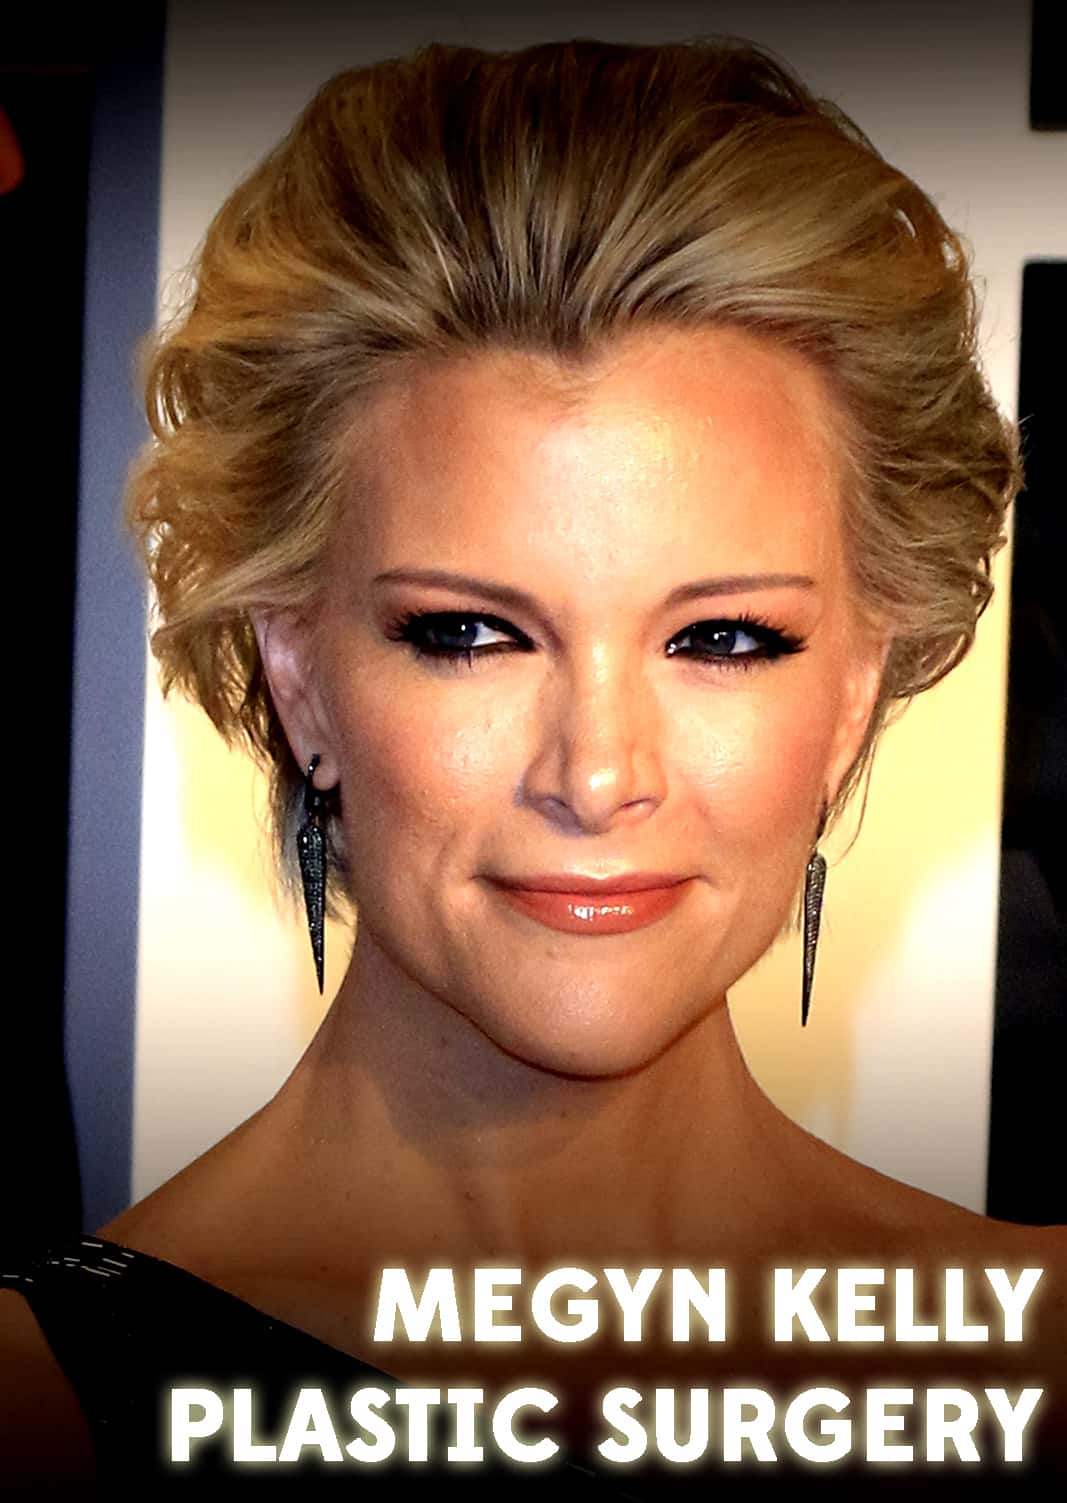 Did Megyn Kelly get plastic surgery recently? A lot of experts seem to think so!